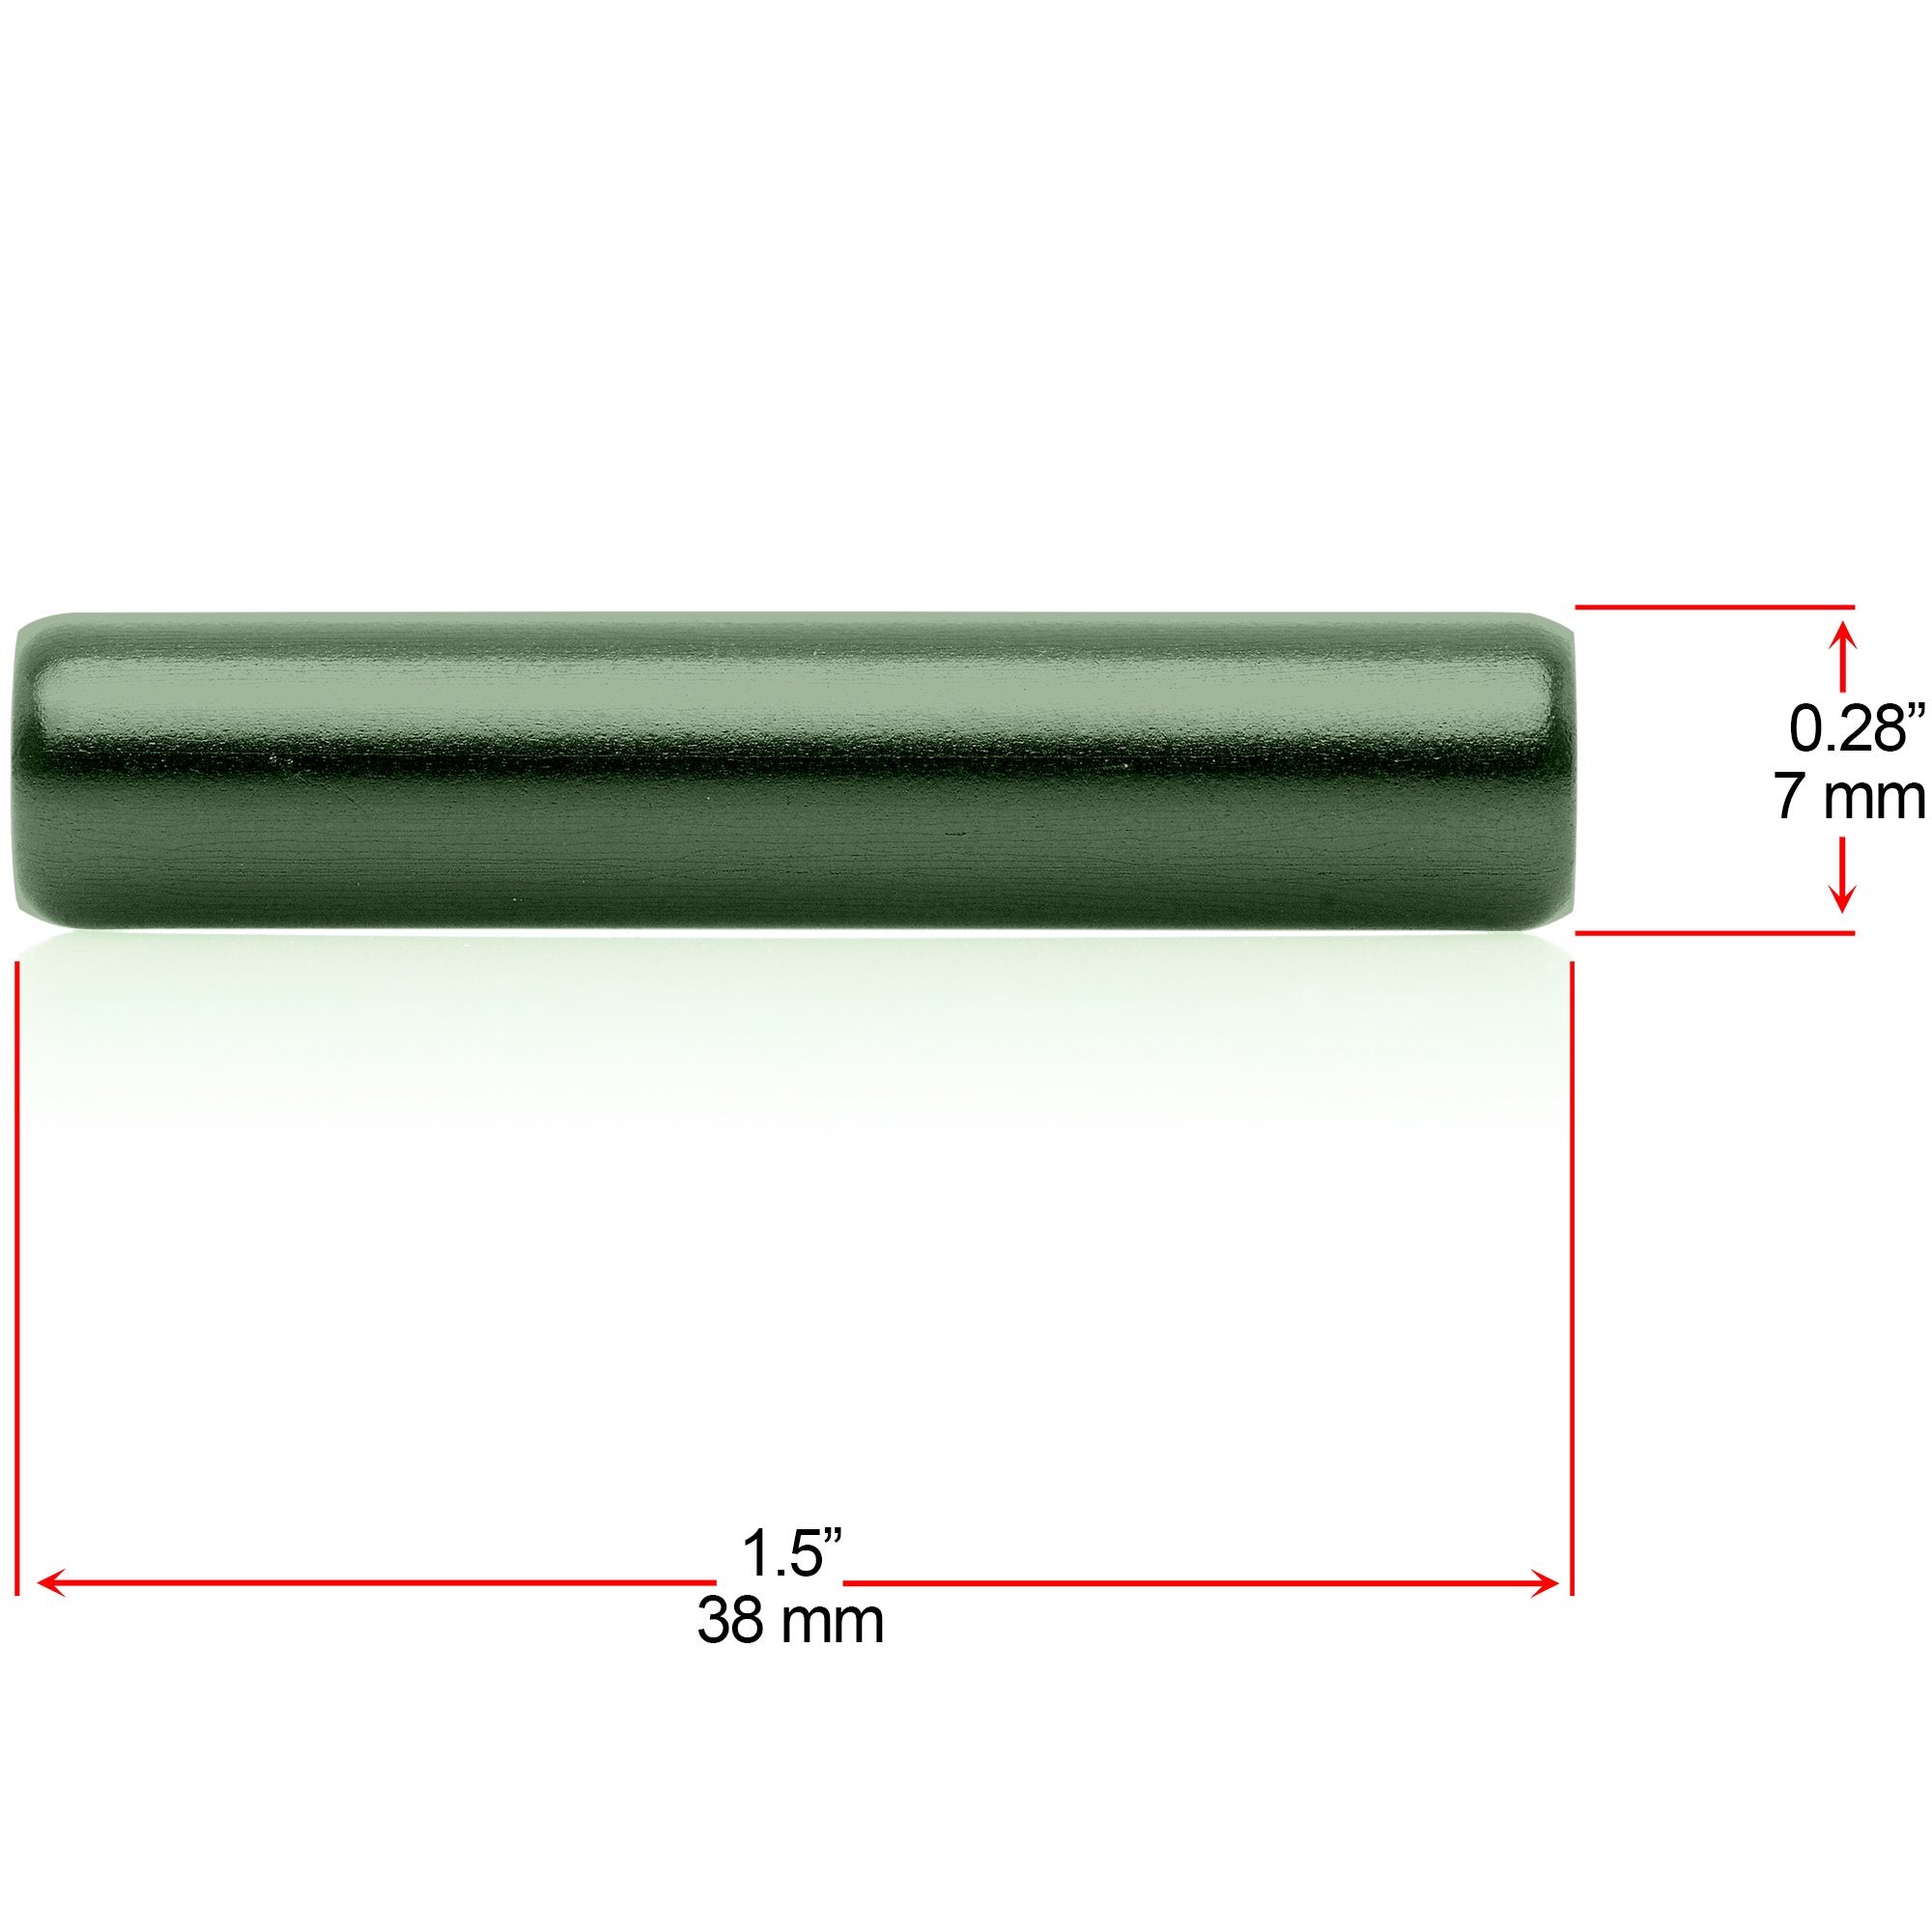 3mm to 4mm Green Aluminum Body Piercing Ball Removal Tool